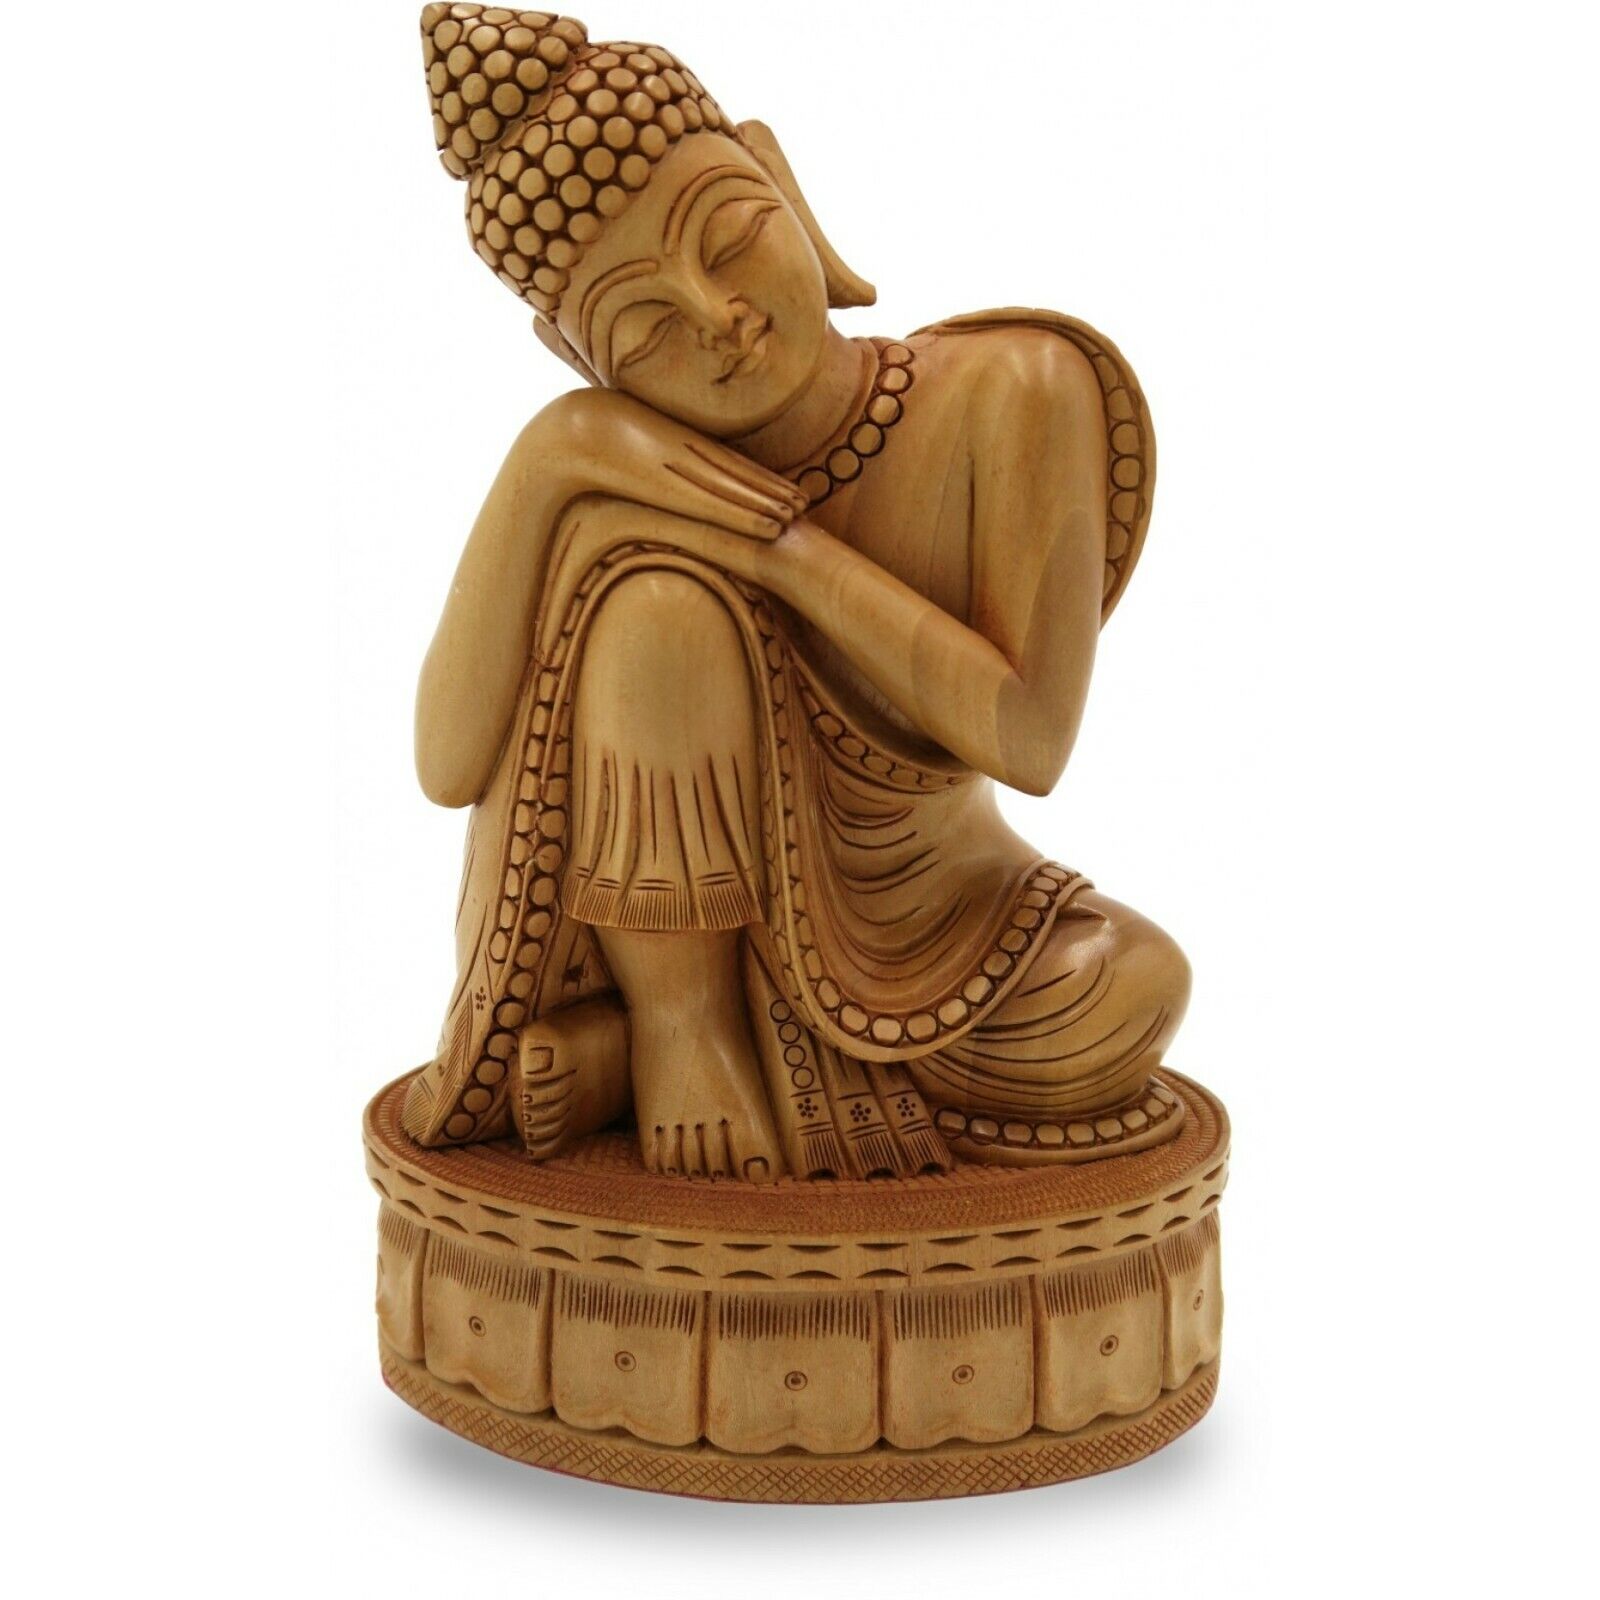 Beautiful Handcrafted Wooden Lord Gautam Buddha Sitting With Head on Knee Statue